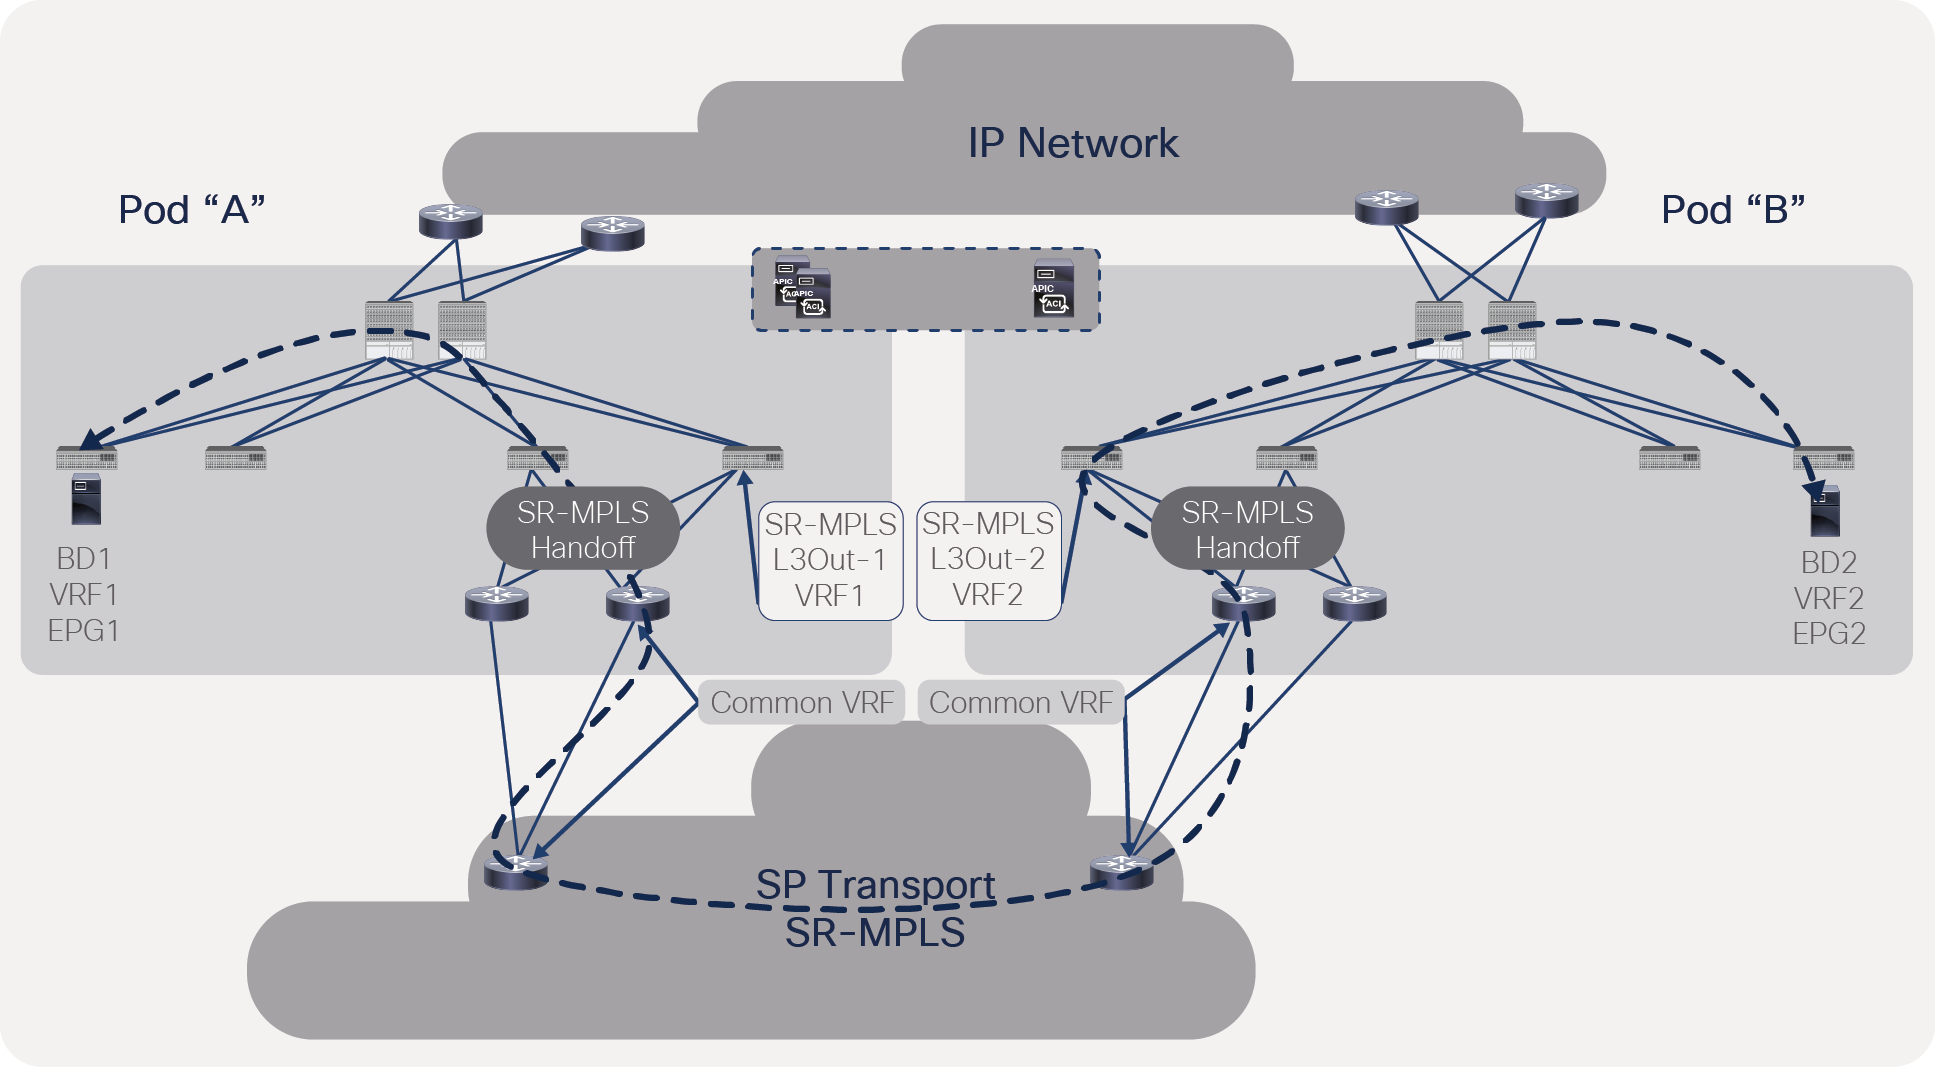 Traffic forwarding between ACI pods with a separate VRF in each pod